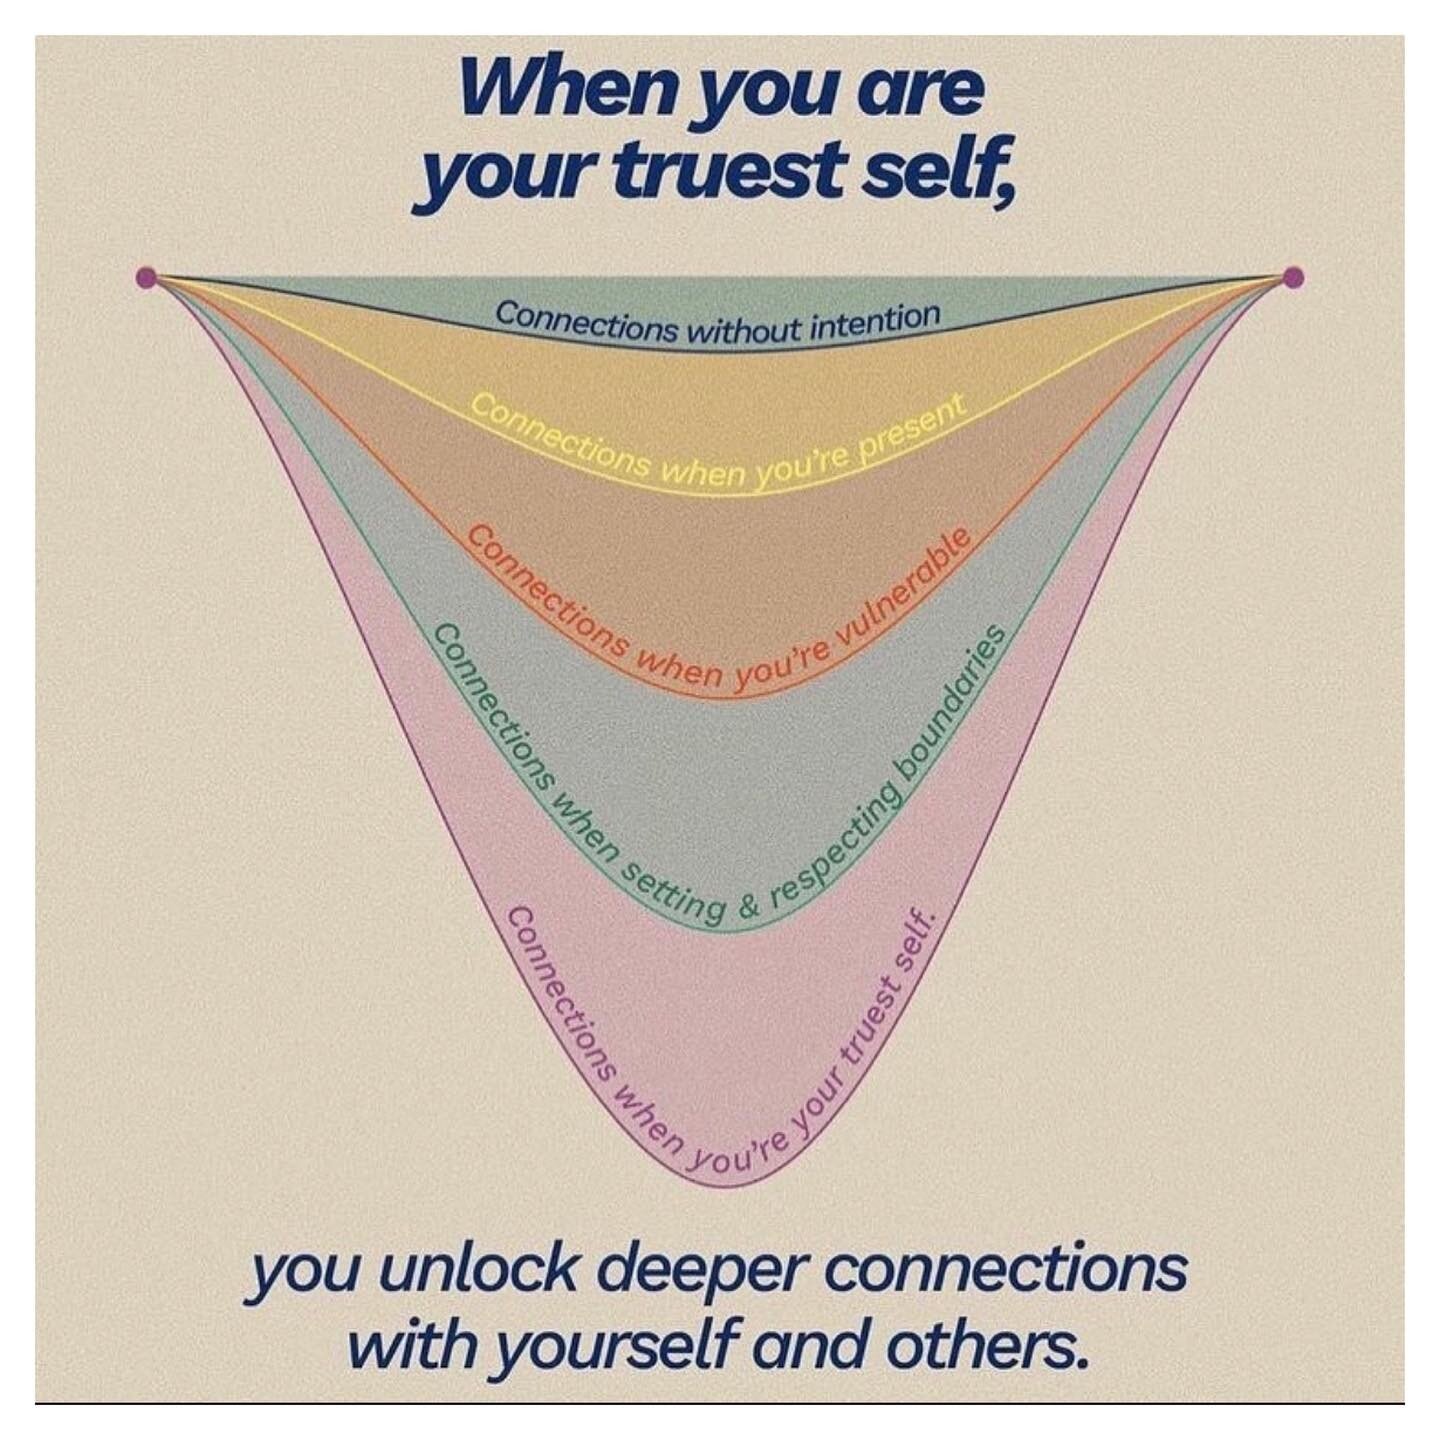 From the EFT lens we grow through our connections with others, not just by ourselves. The more authentically we can connect the better it can feel. .
.
.
#mindfulpractice #mindfulness #mentalhealth #mentalhealthawareness #selflove #psychology #mindfu